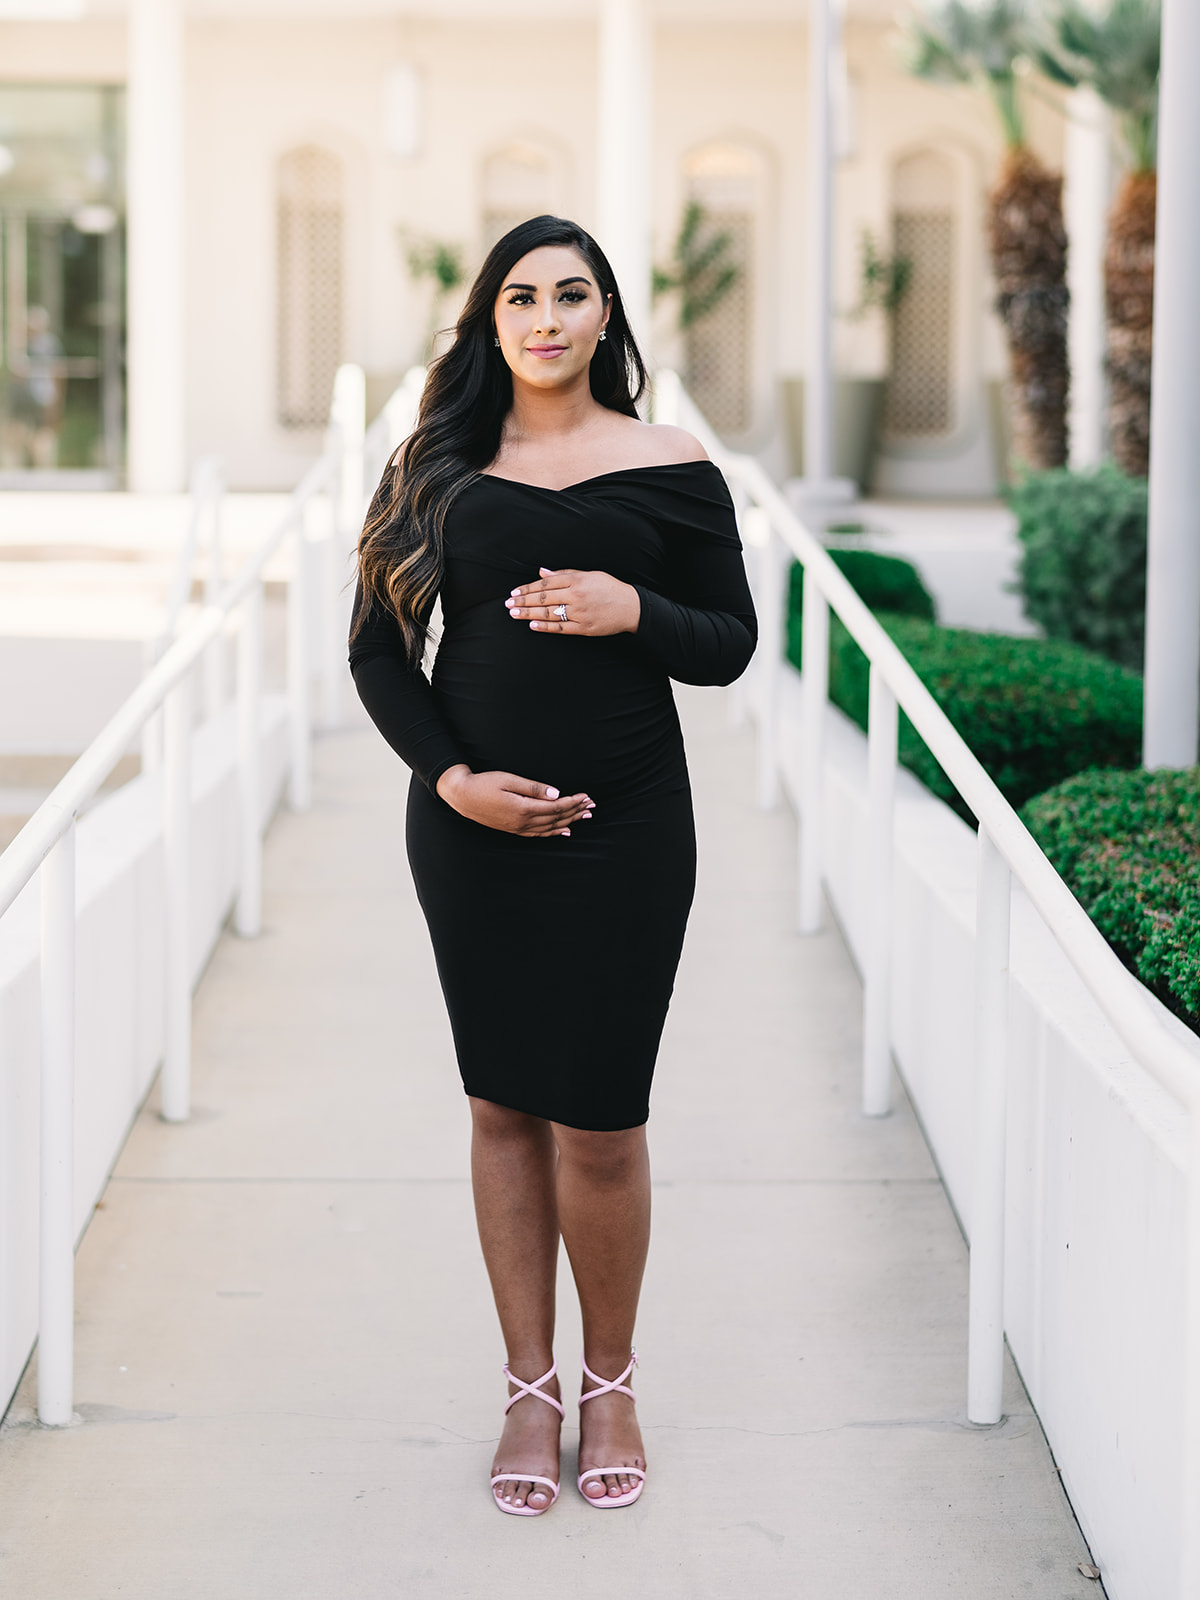 Maternity Session at Brand Libary in Glendale, California